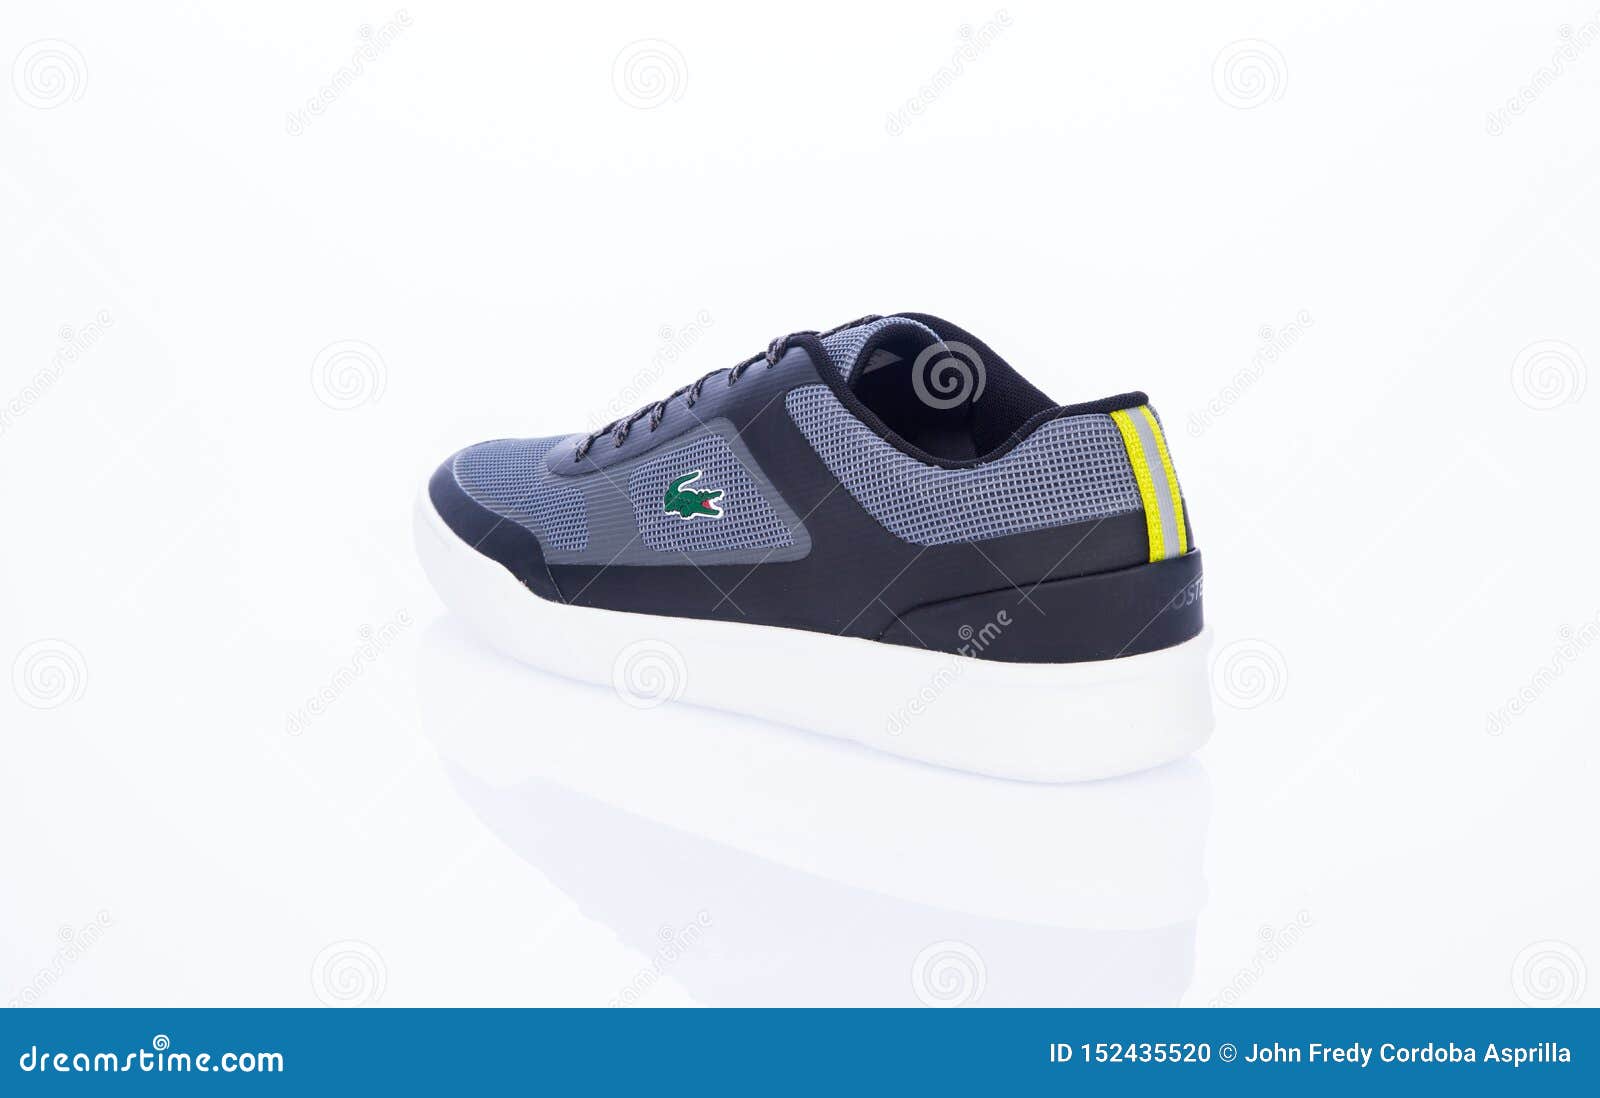 new lacoste shoes 2019